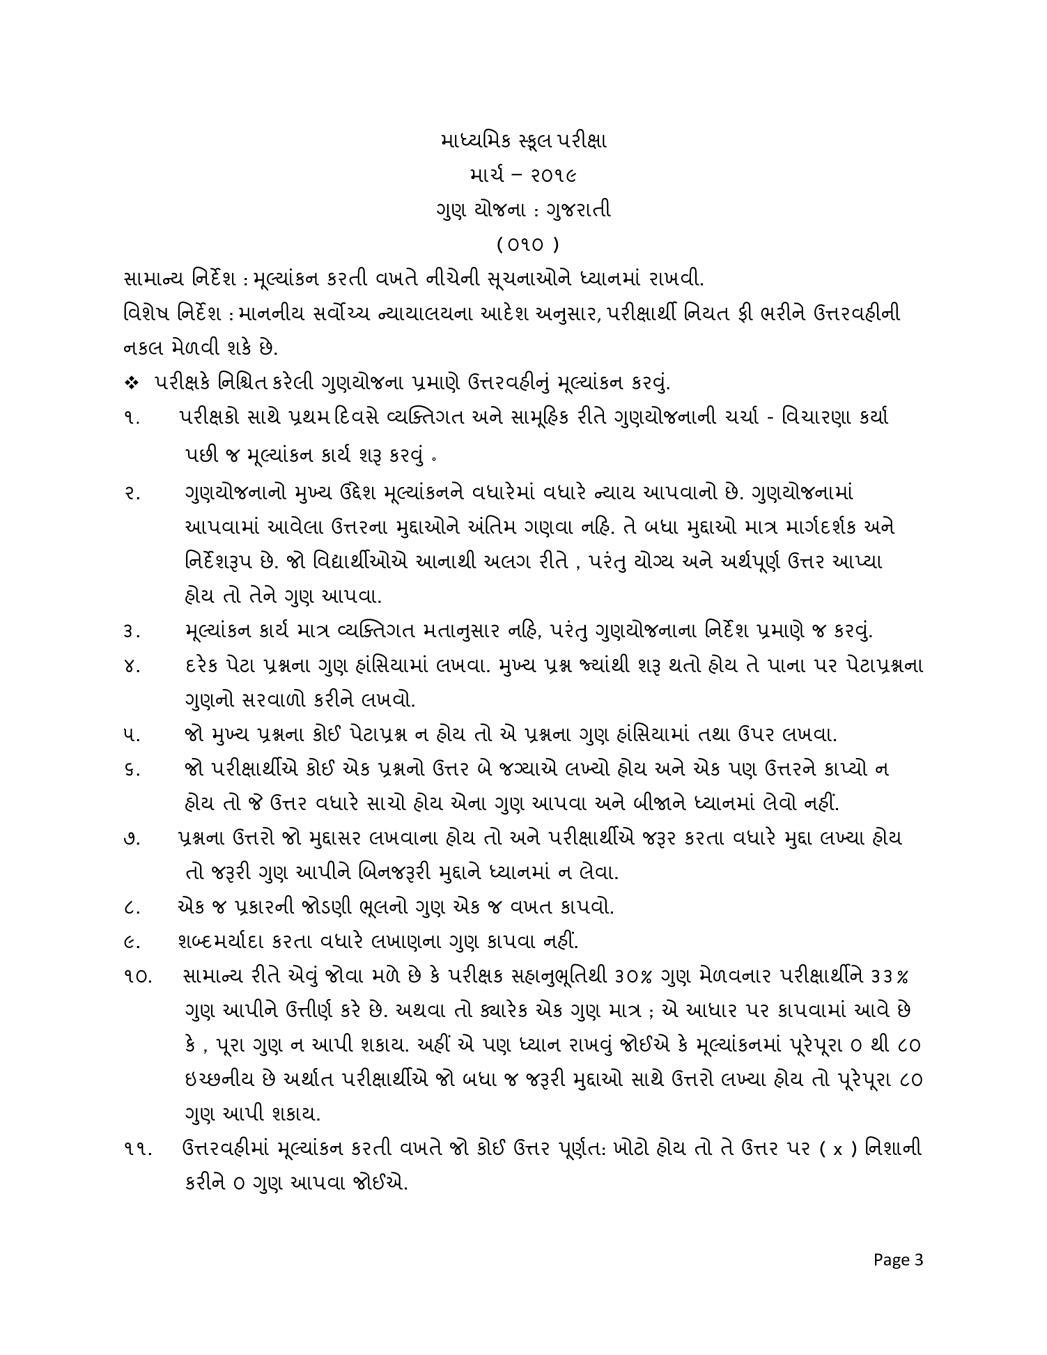 CBSE Class 10 Gujarati Question Paper 2019 Solutions - Page 1